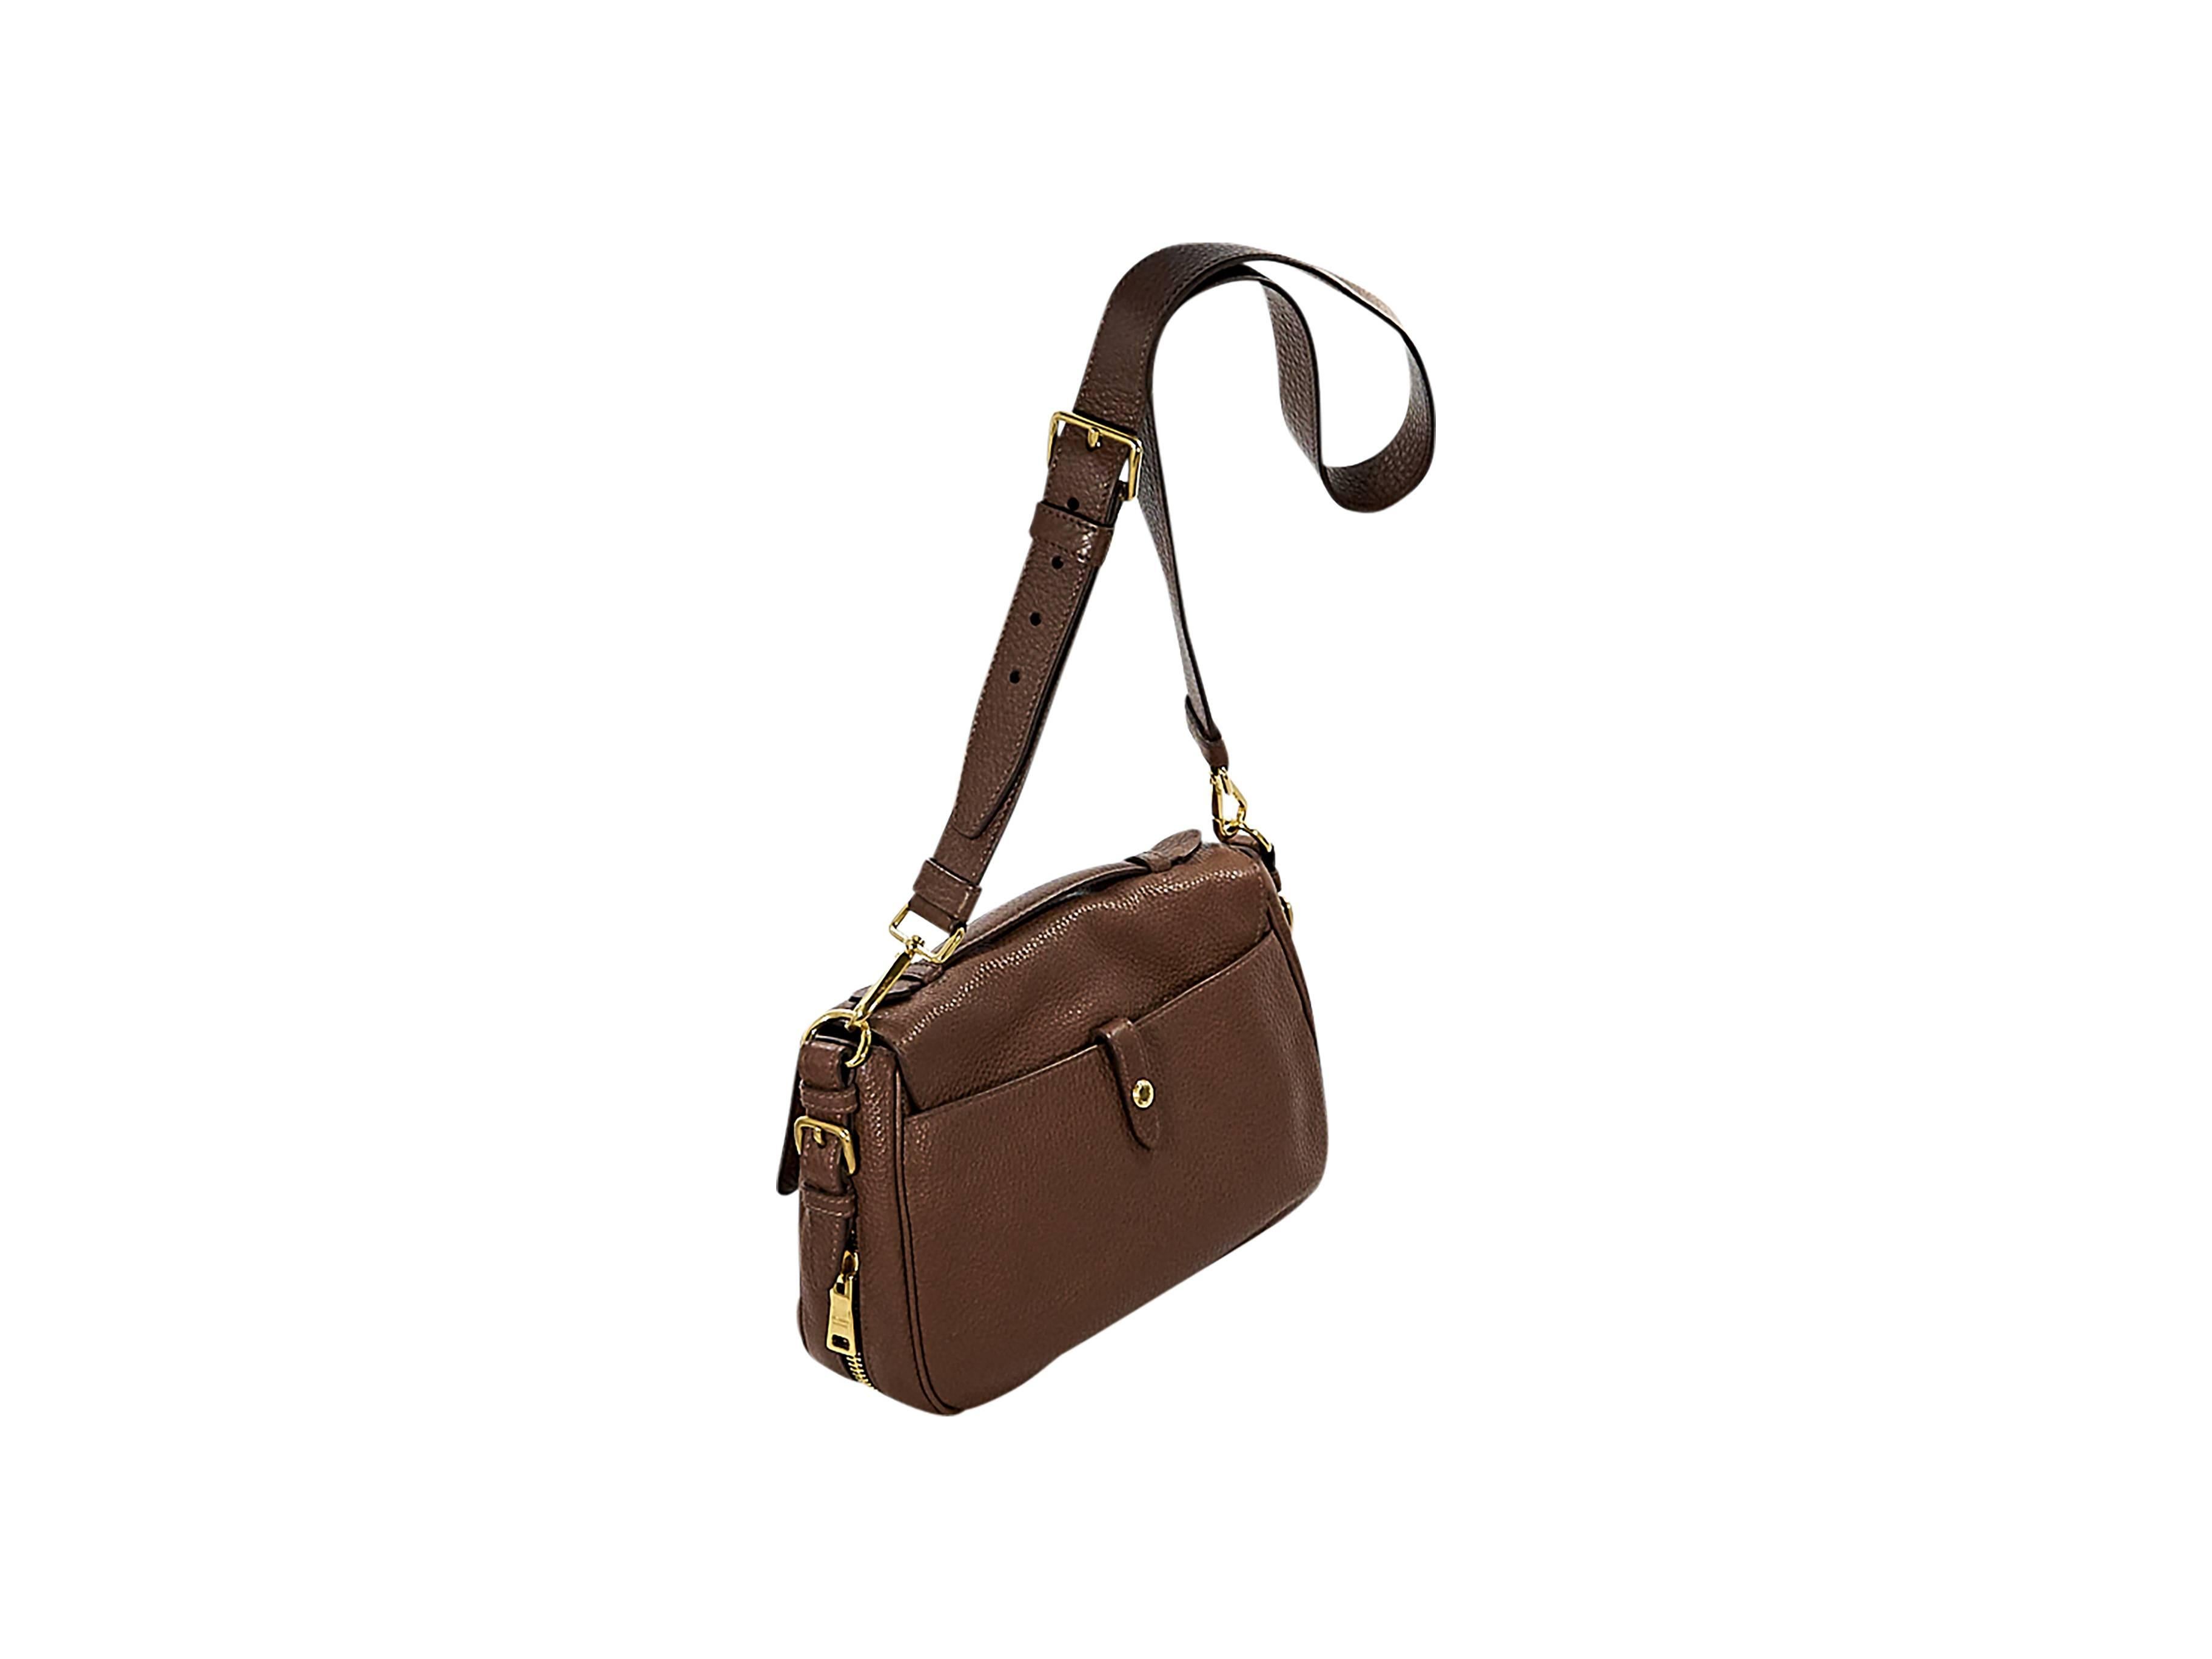 Product details:  Brown pebbled leather small messenger bag by Prada.  Top carry handle.  Detachable, adjustable crossbody strap.  Front flap over exterior slide pocket.  Push-lock and double buckle front closure.  Side zipper accents.  Lined